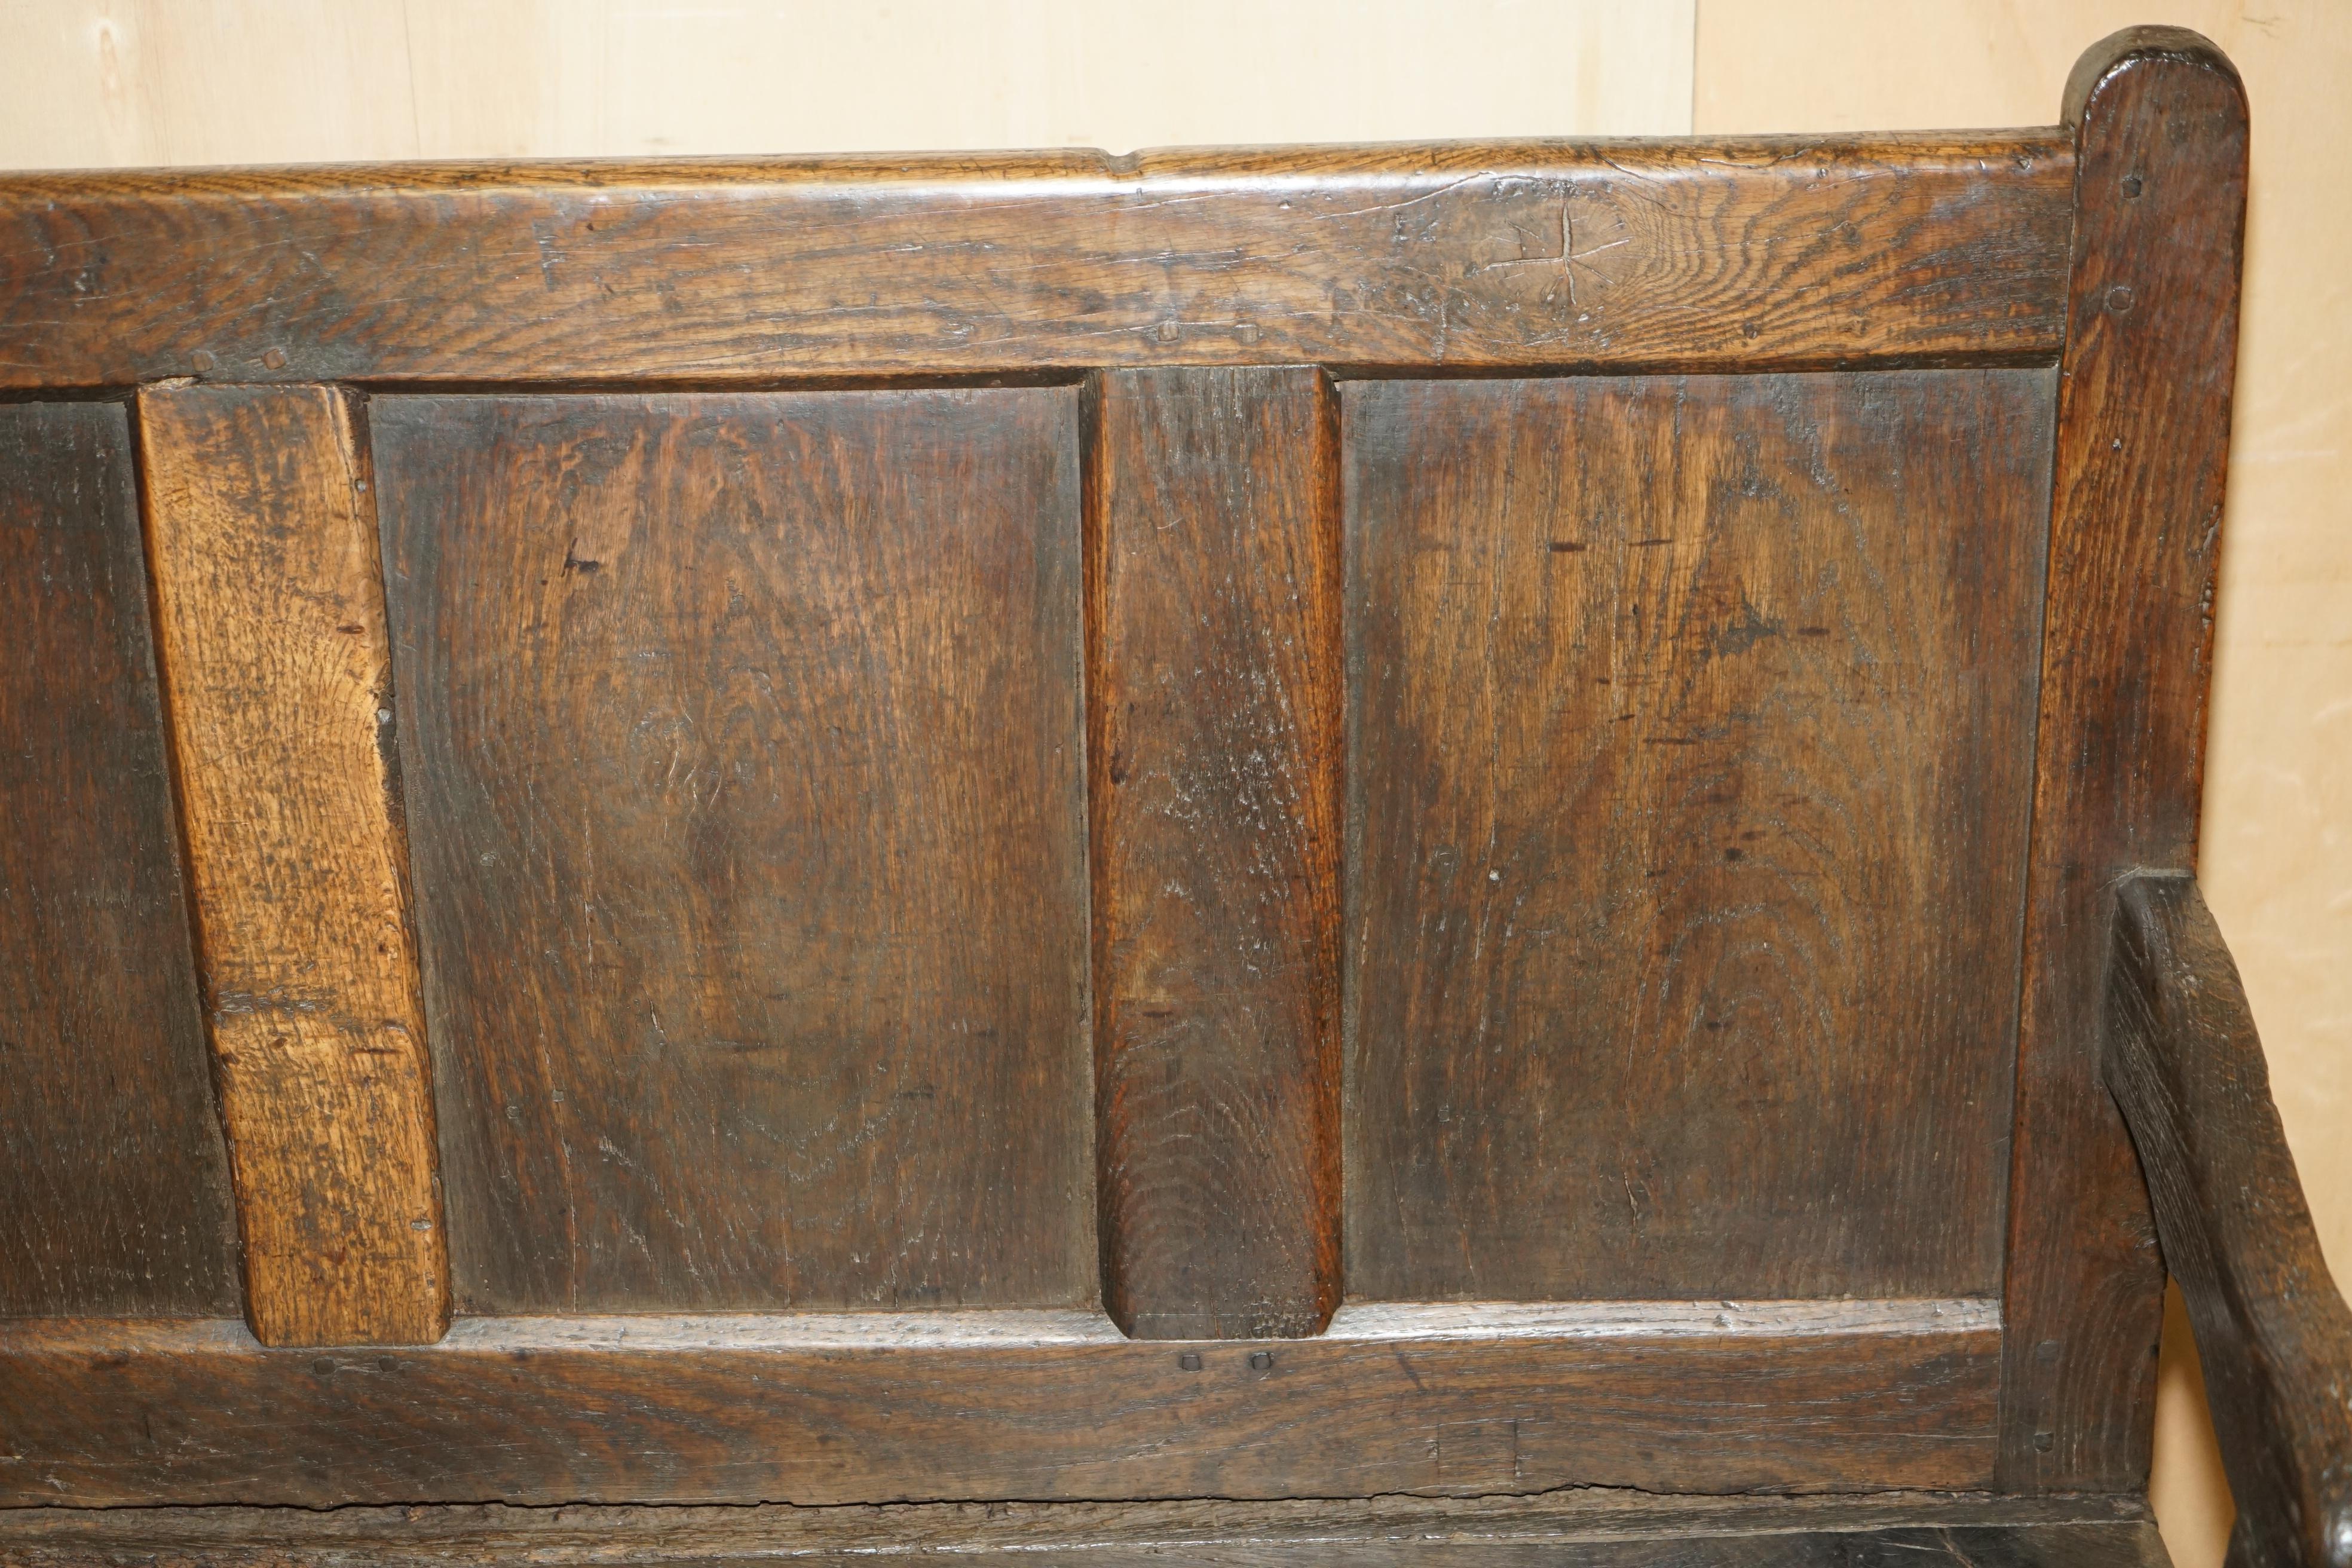 STUNNiNG 17TH CENTURY ANGLESEY WALES SETTLE BENCH LOVELY HALLWAY TAVERN SEATING im Angebot 2